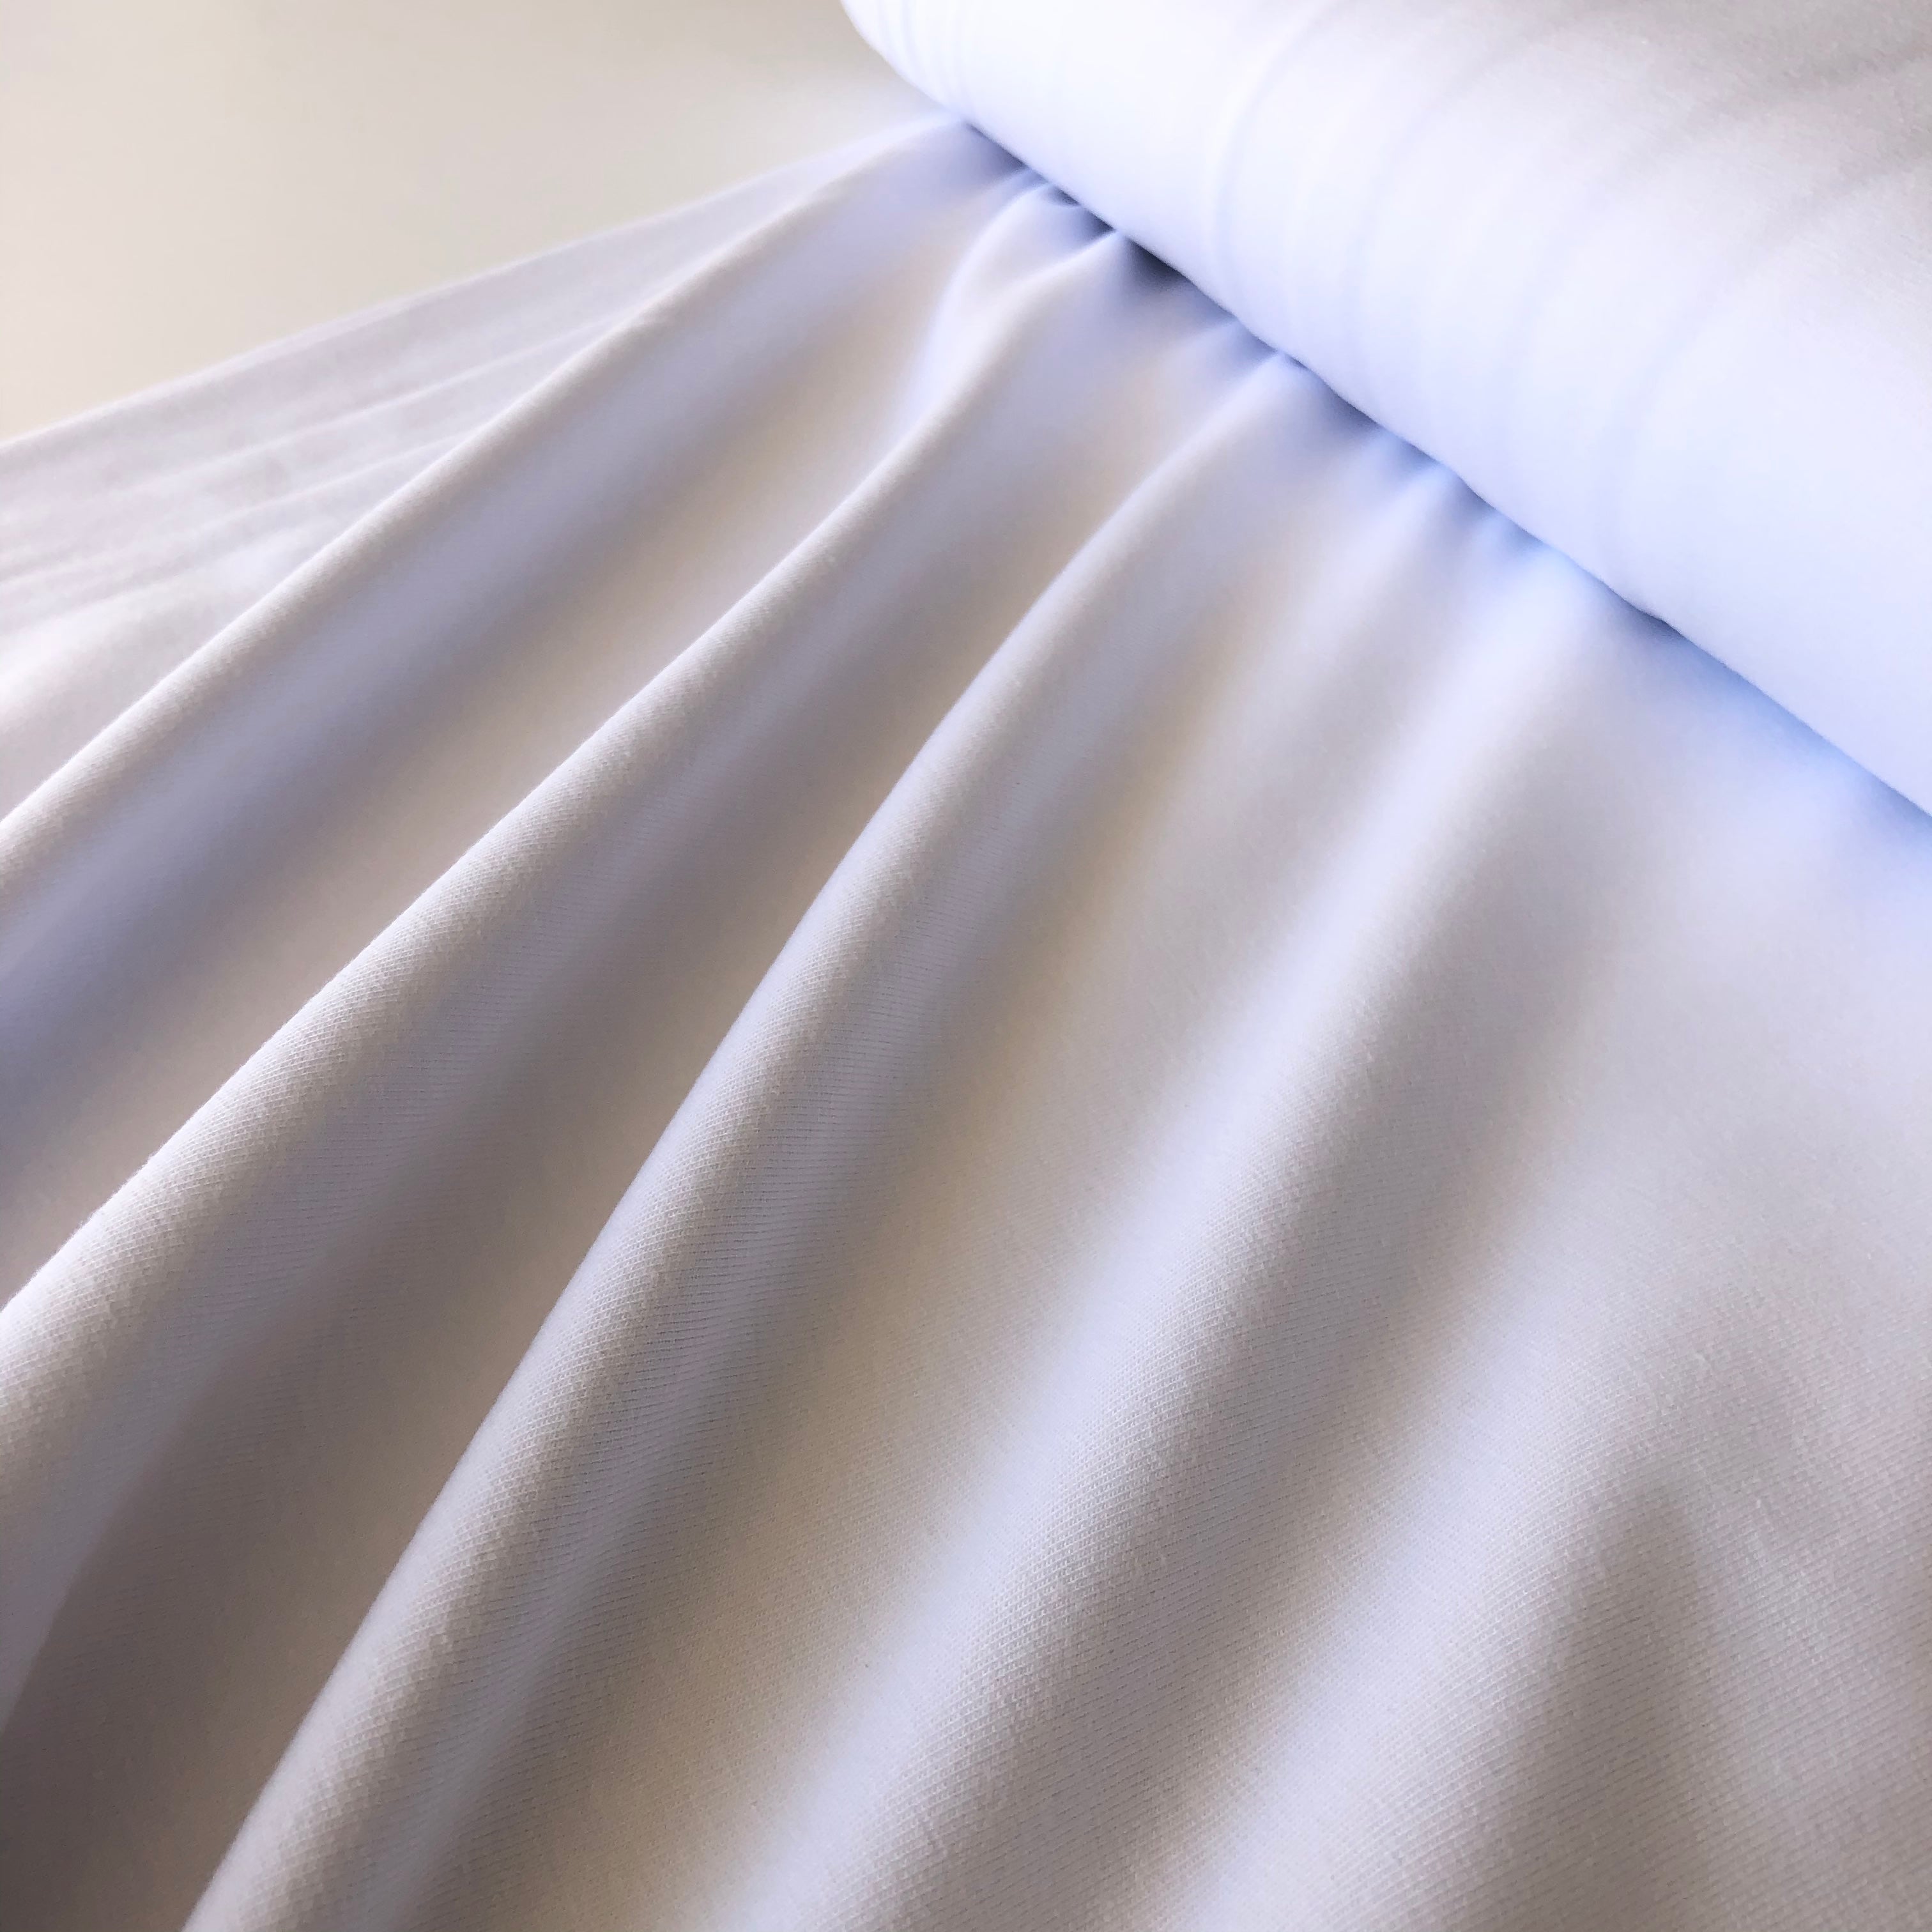 (with dirt marks in places) Essential Chic White Plain Cotton Jersey Fabric